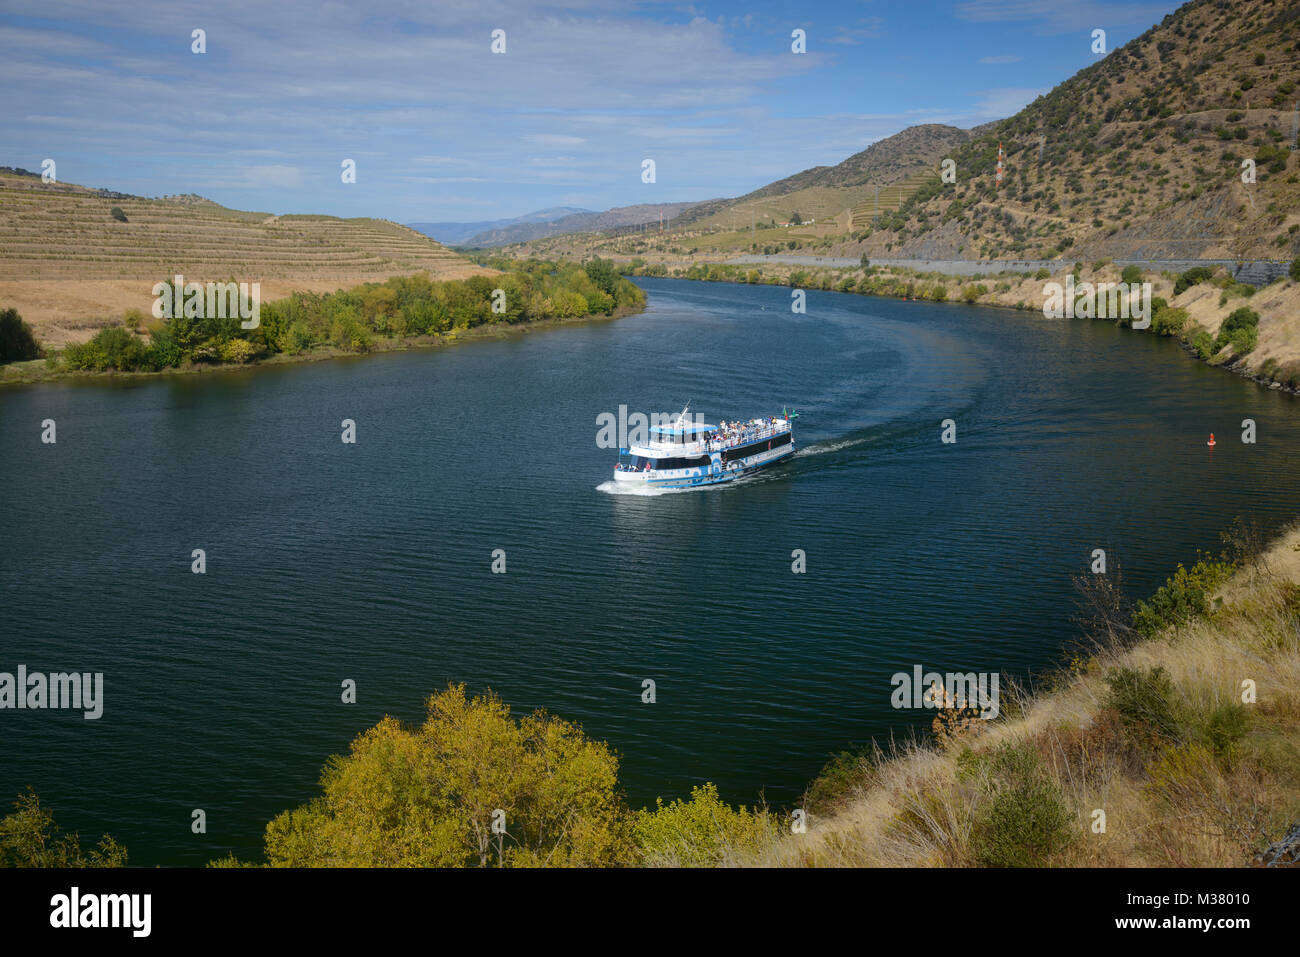 Cruise boat on the Douro river, Portugal, Europe Stock Photo